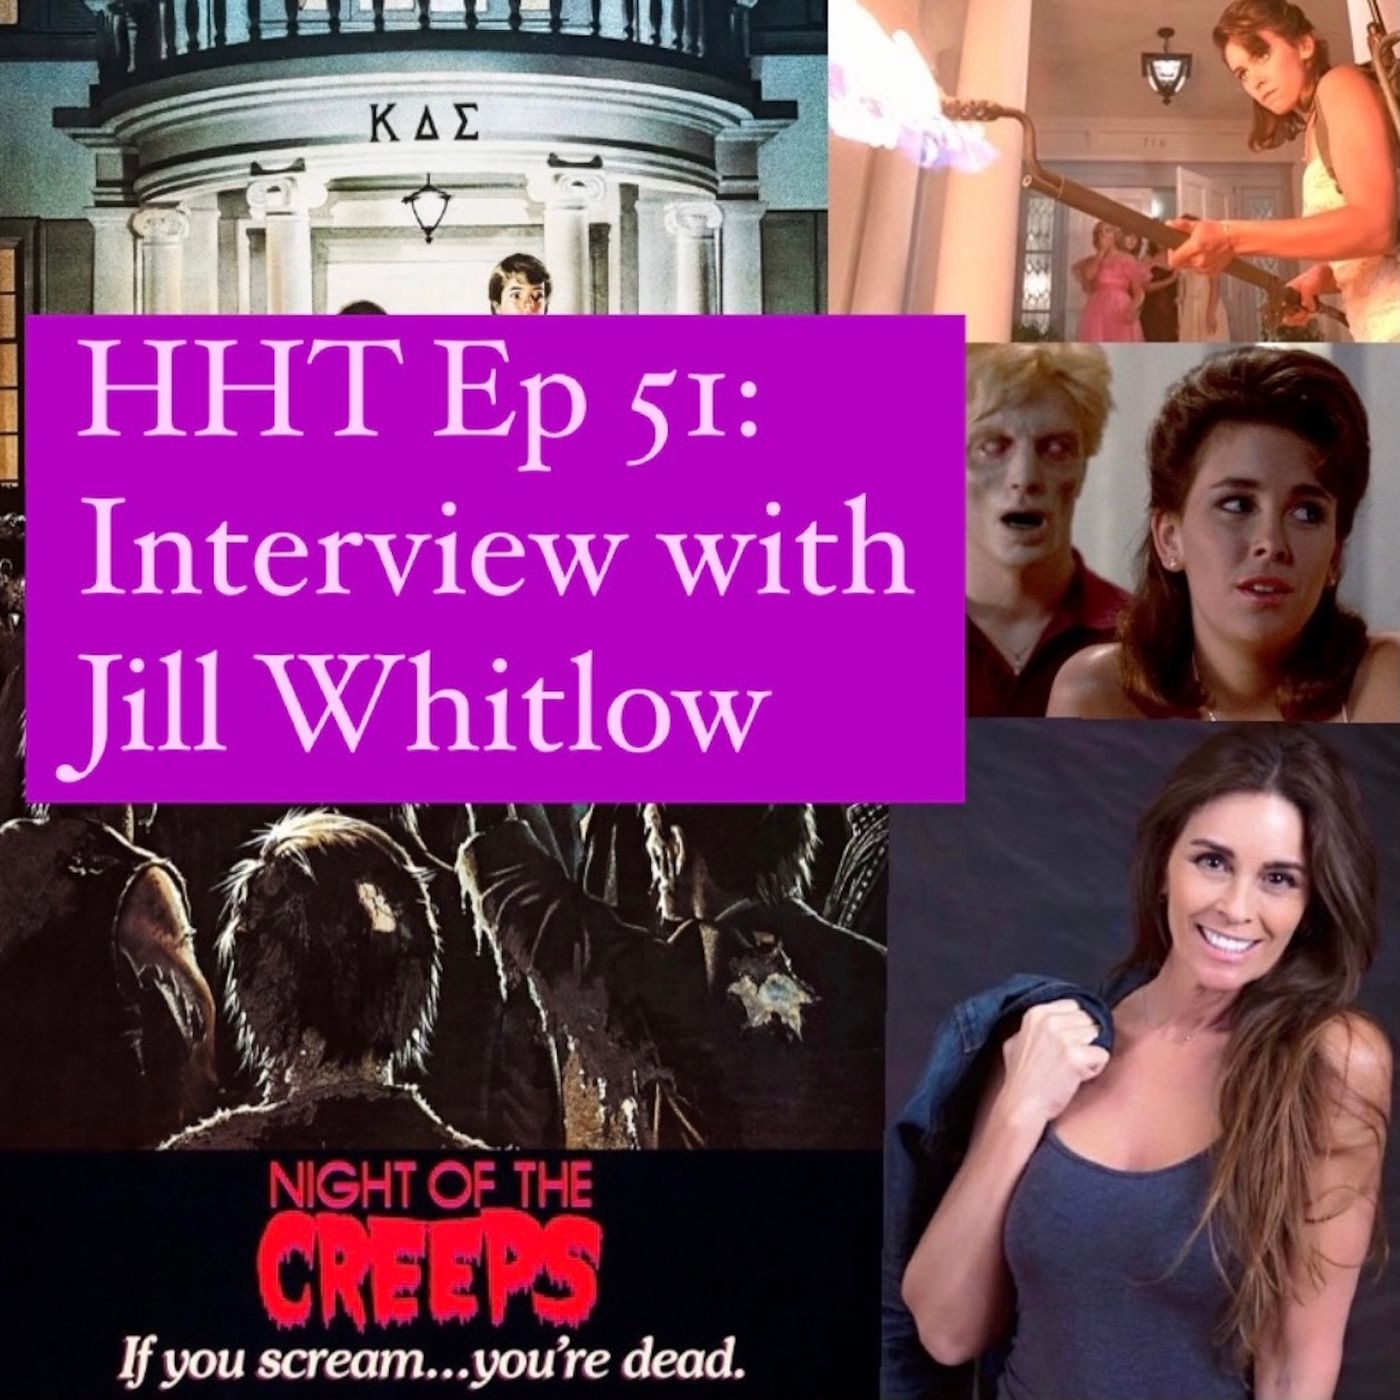 Ep 51: Interview w/Jill Whitlow from "Night of the Creeps" Image